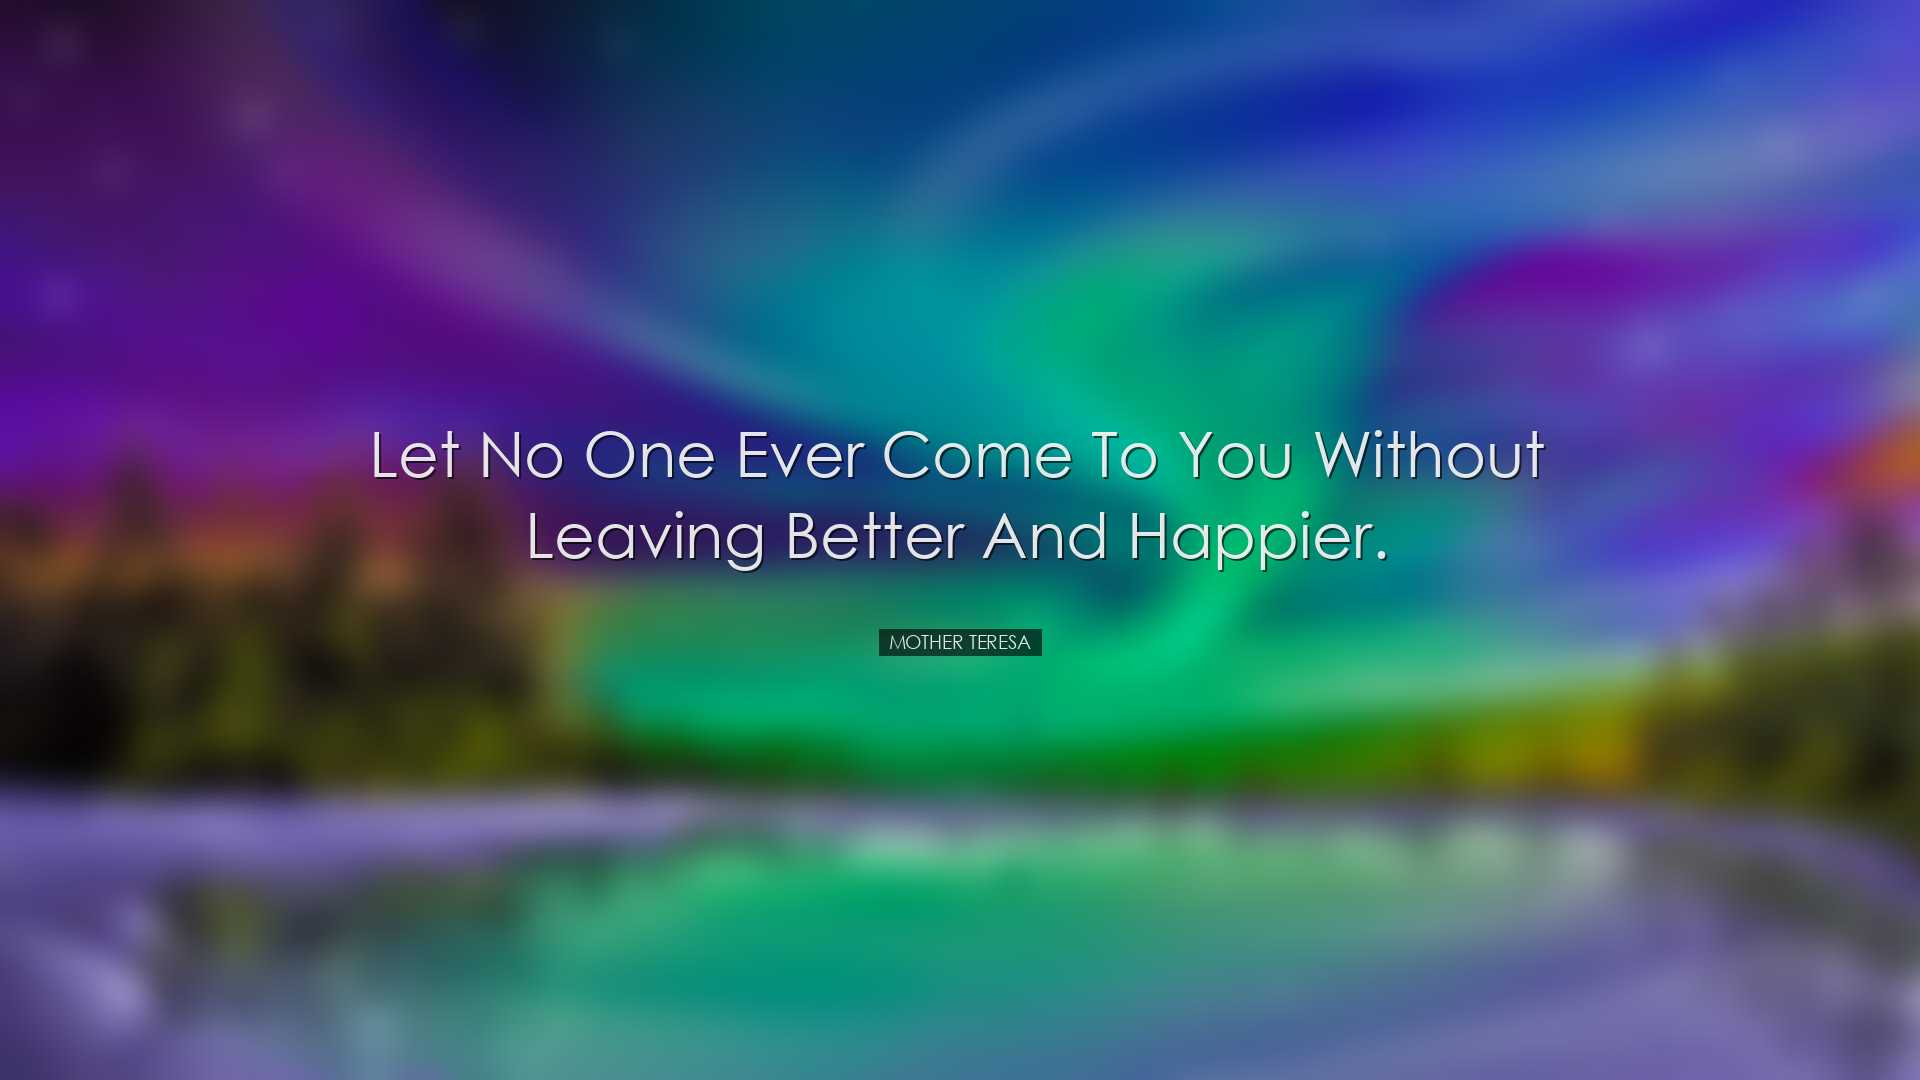 Let no one ever come to you without leaving better and happier. -